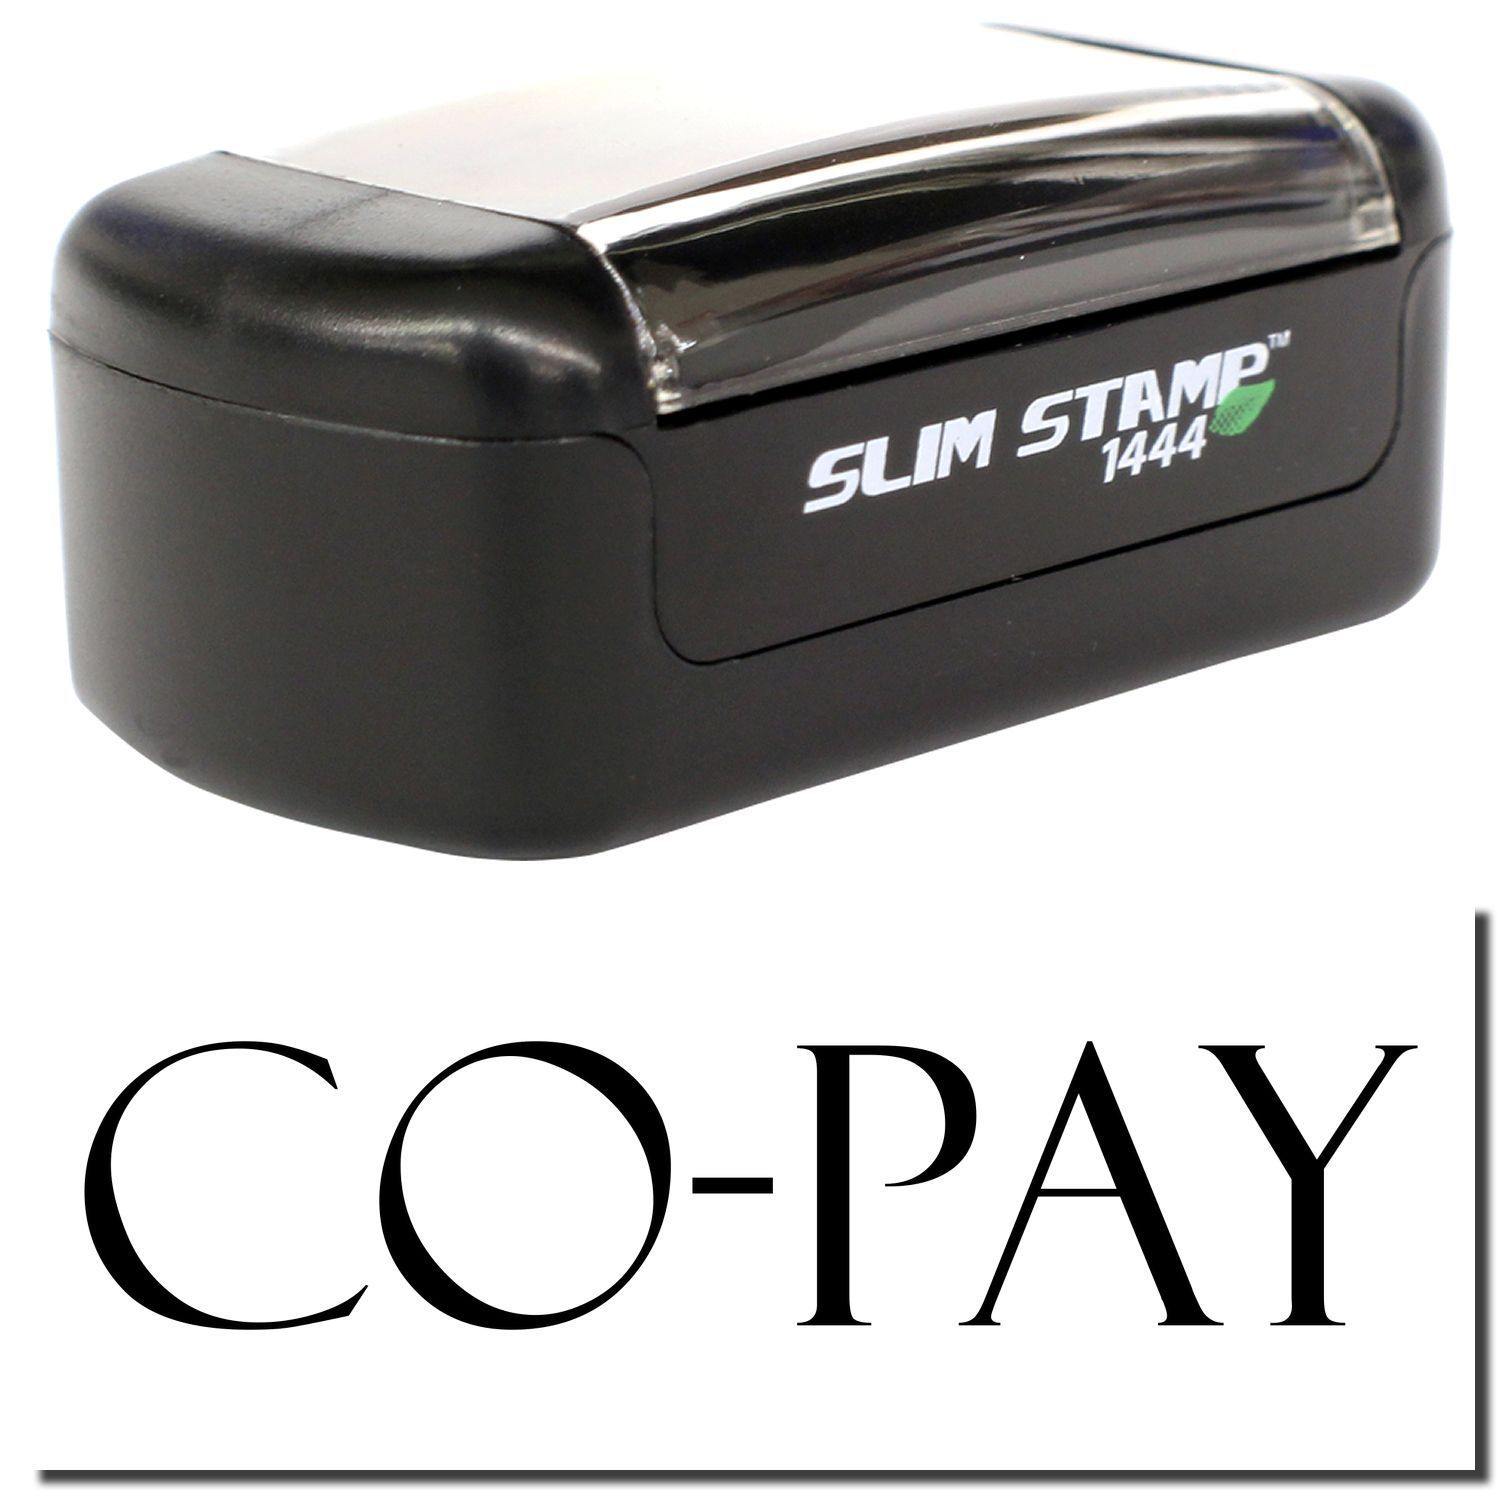 A stock office pre-inked stamp with a stamped image showing how the text "CO-PAY" is displayed after stamping.